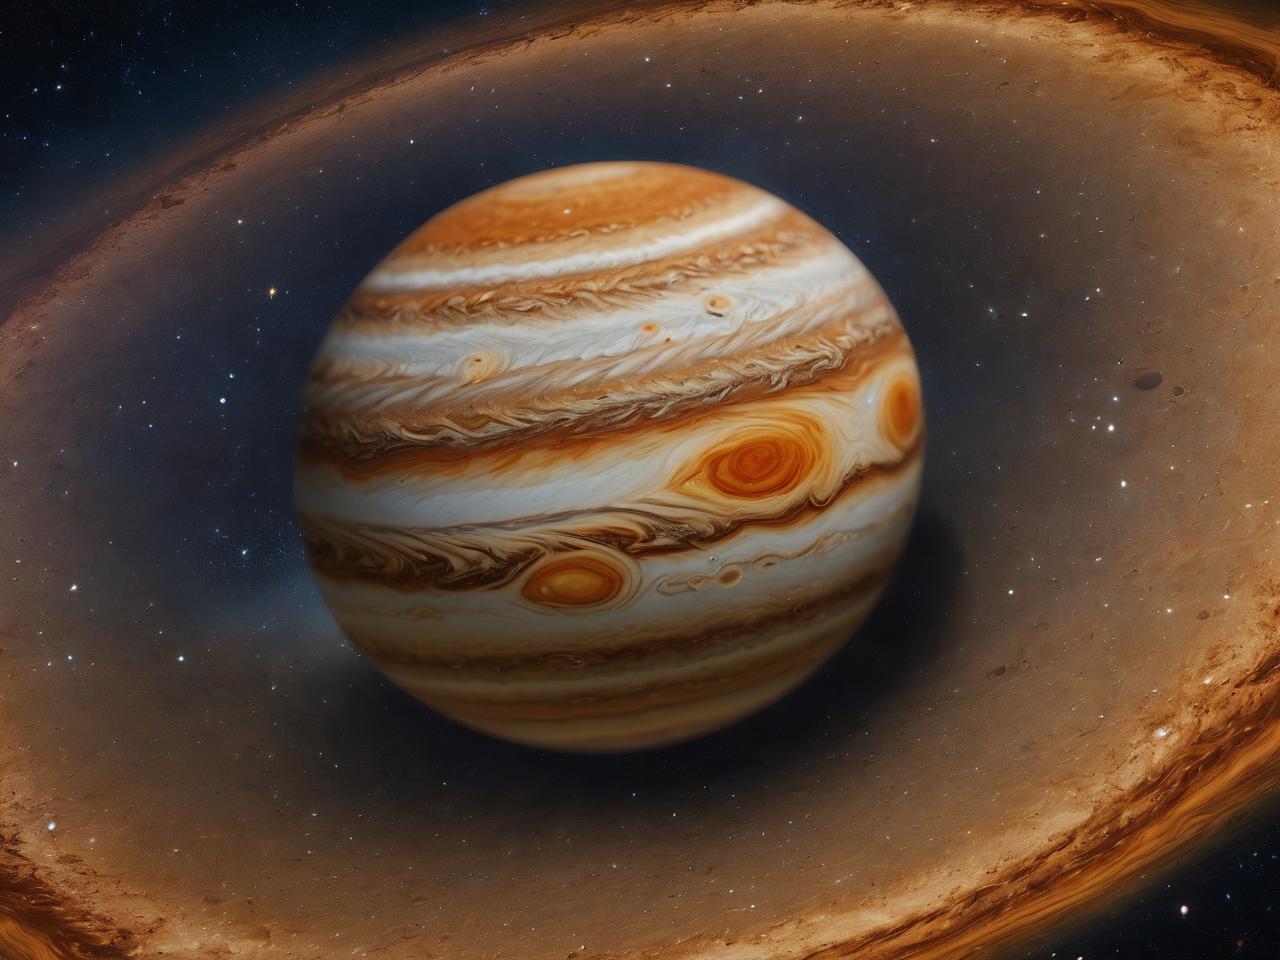 The influence of Jupiter in Cancer: Emotional rebirth